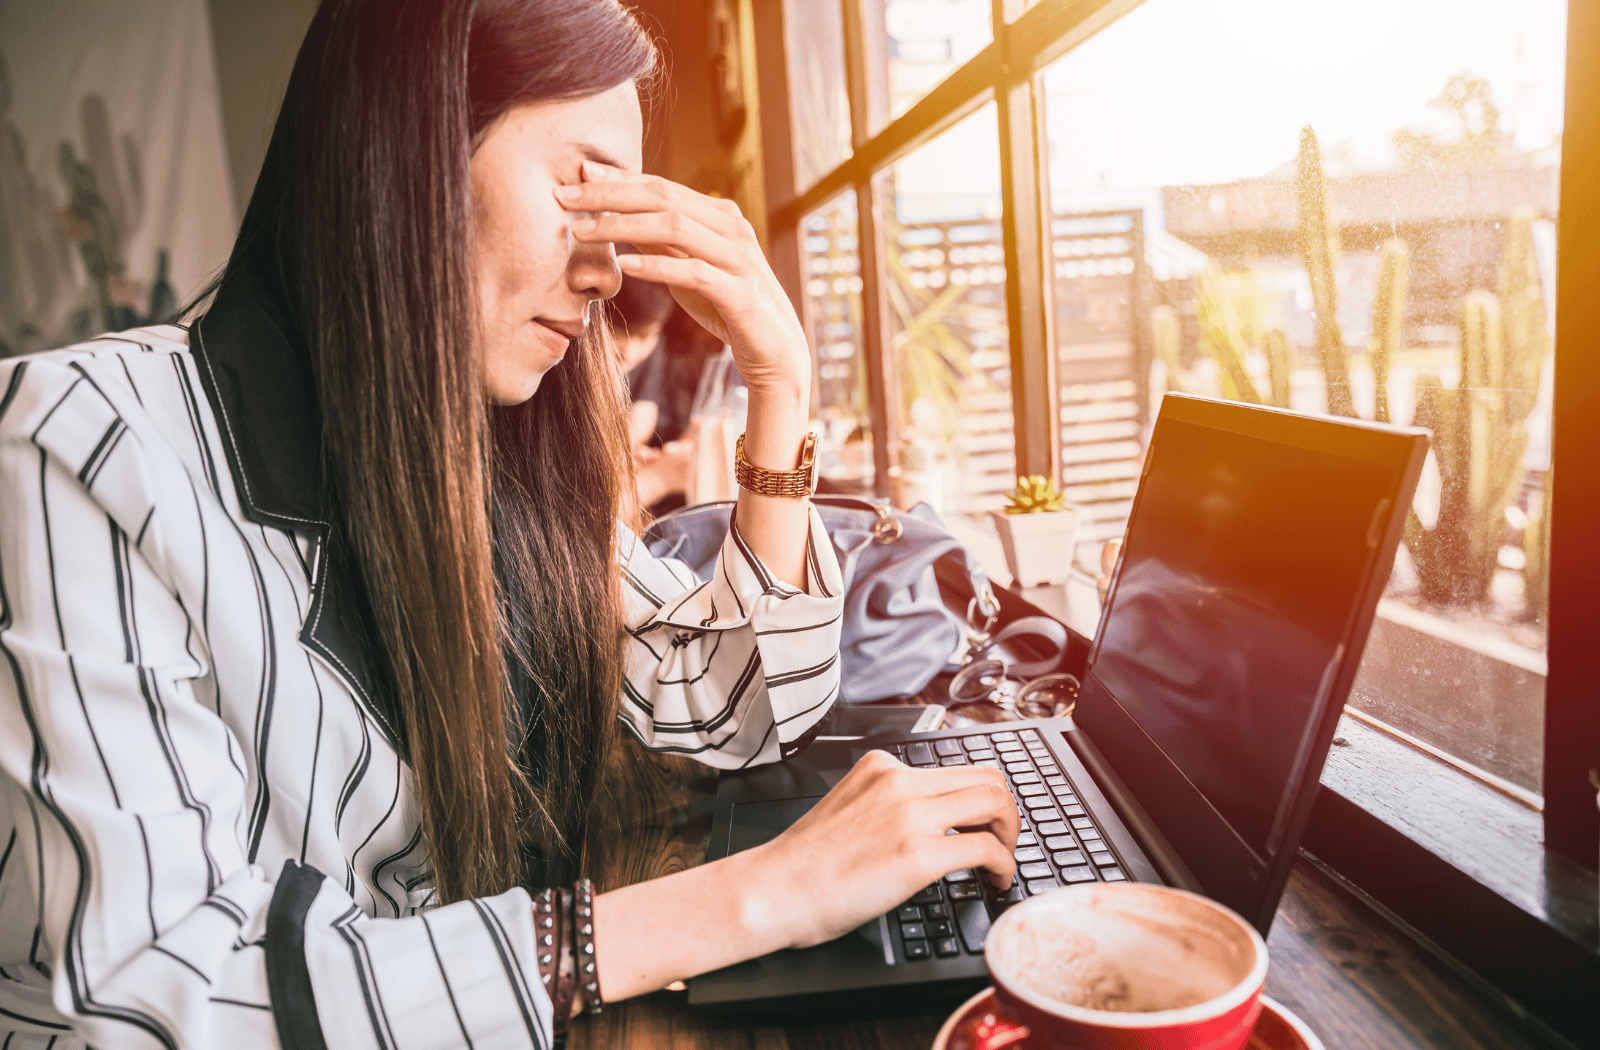 A woman sitting in a coffee shop rubbing her eyes due to looking at a computer screen for too long.